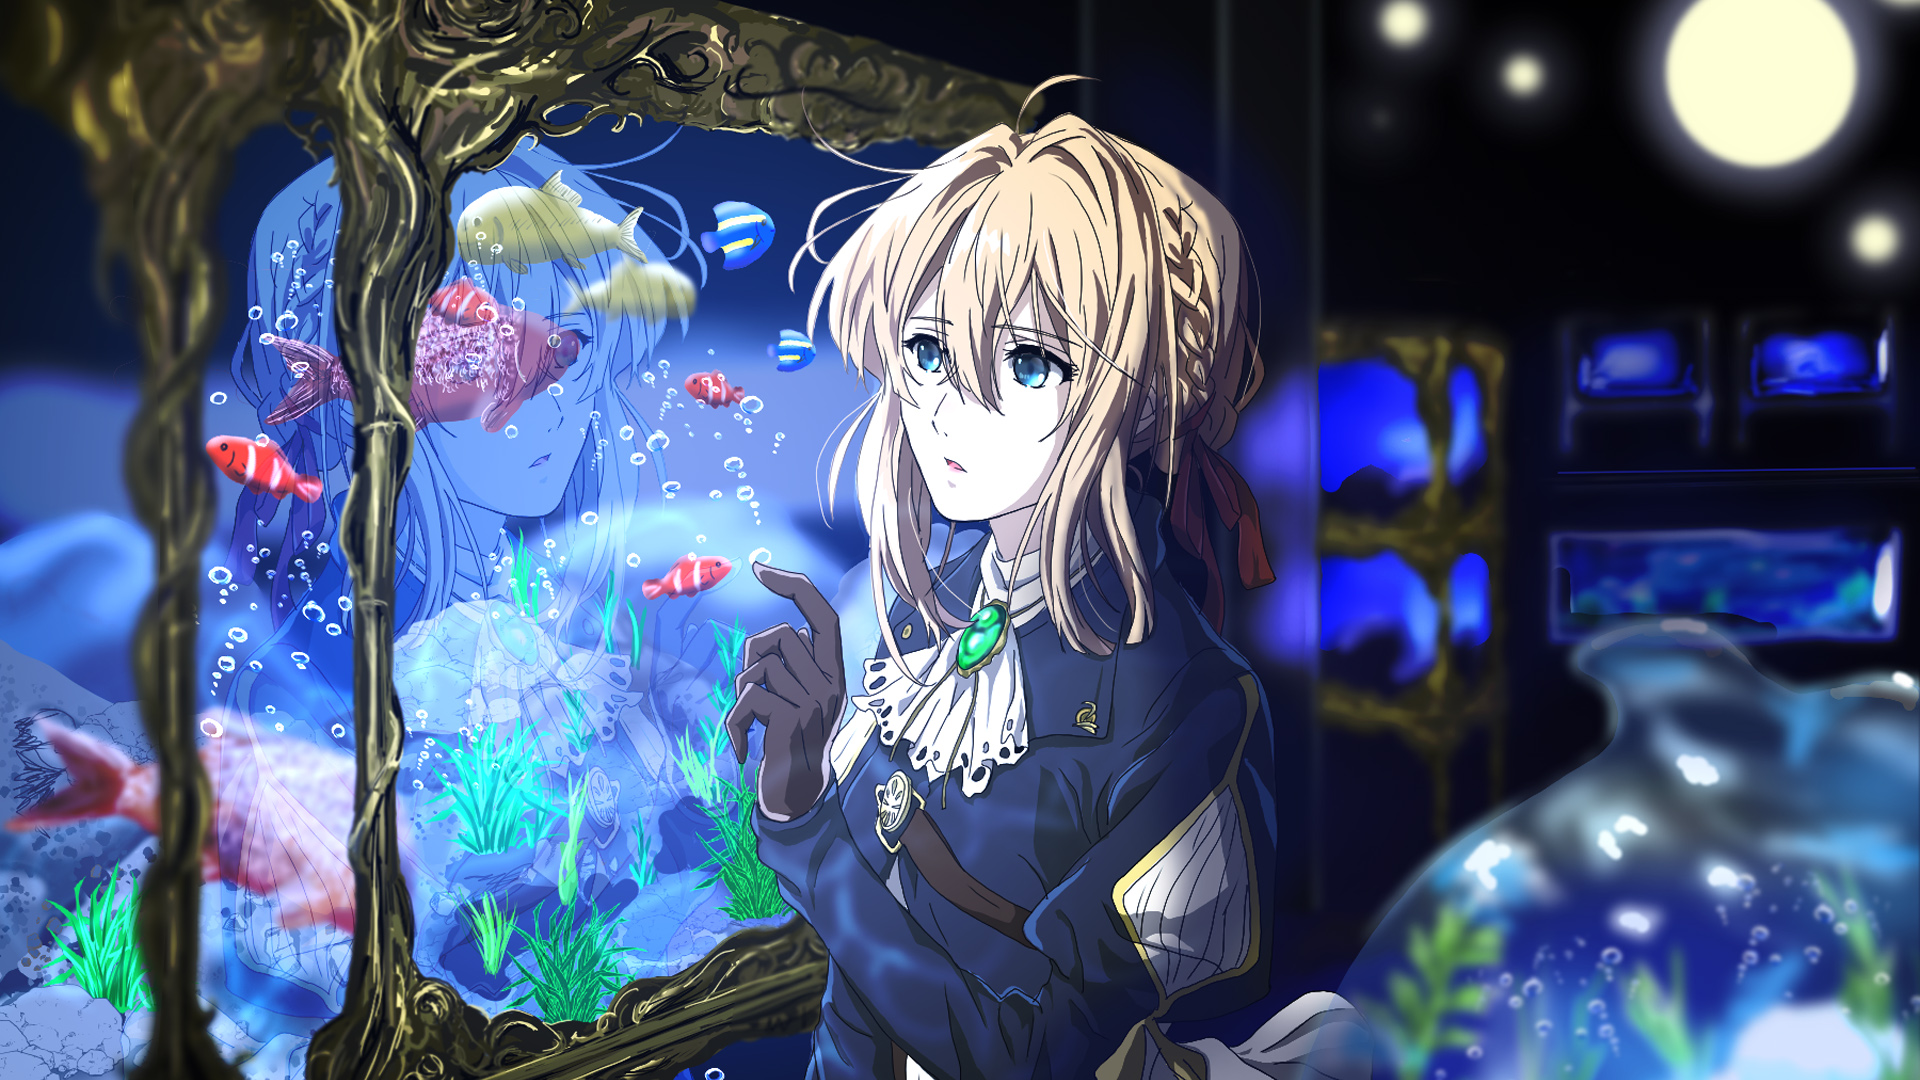 Violet Evergarden Violet Evergarden Character Poster Anime Anime Girls Reflection Fish Bubbles Anima 1920x1080